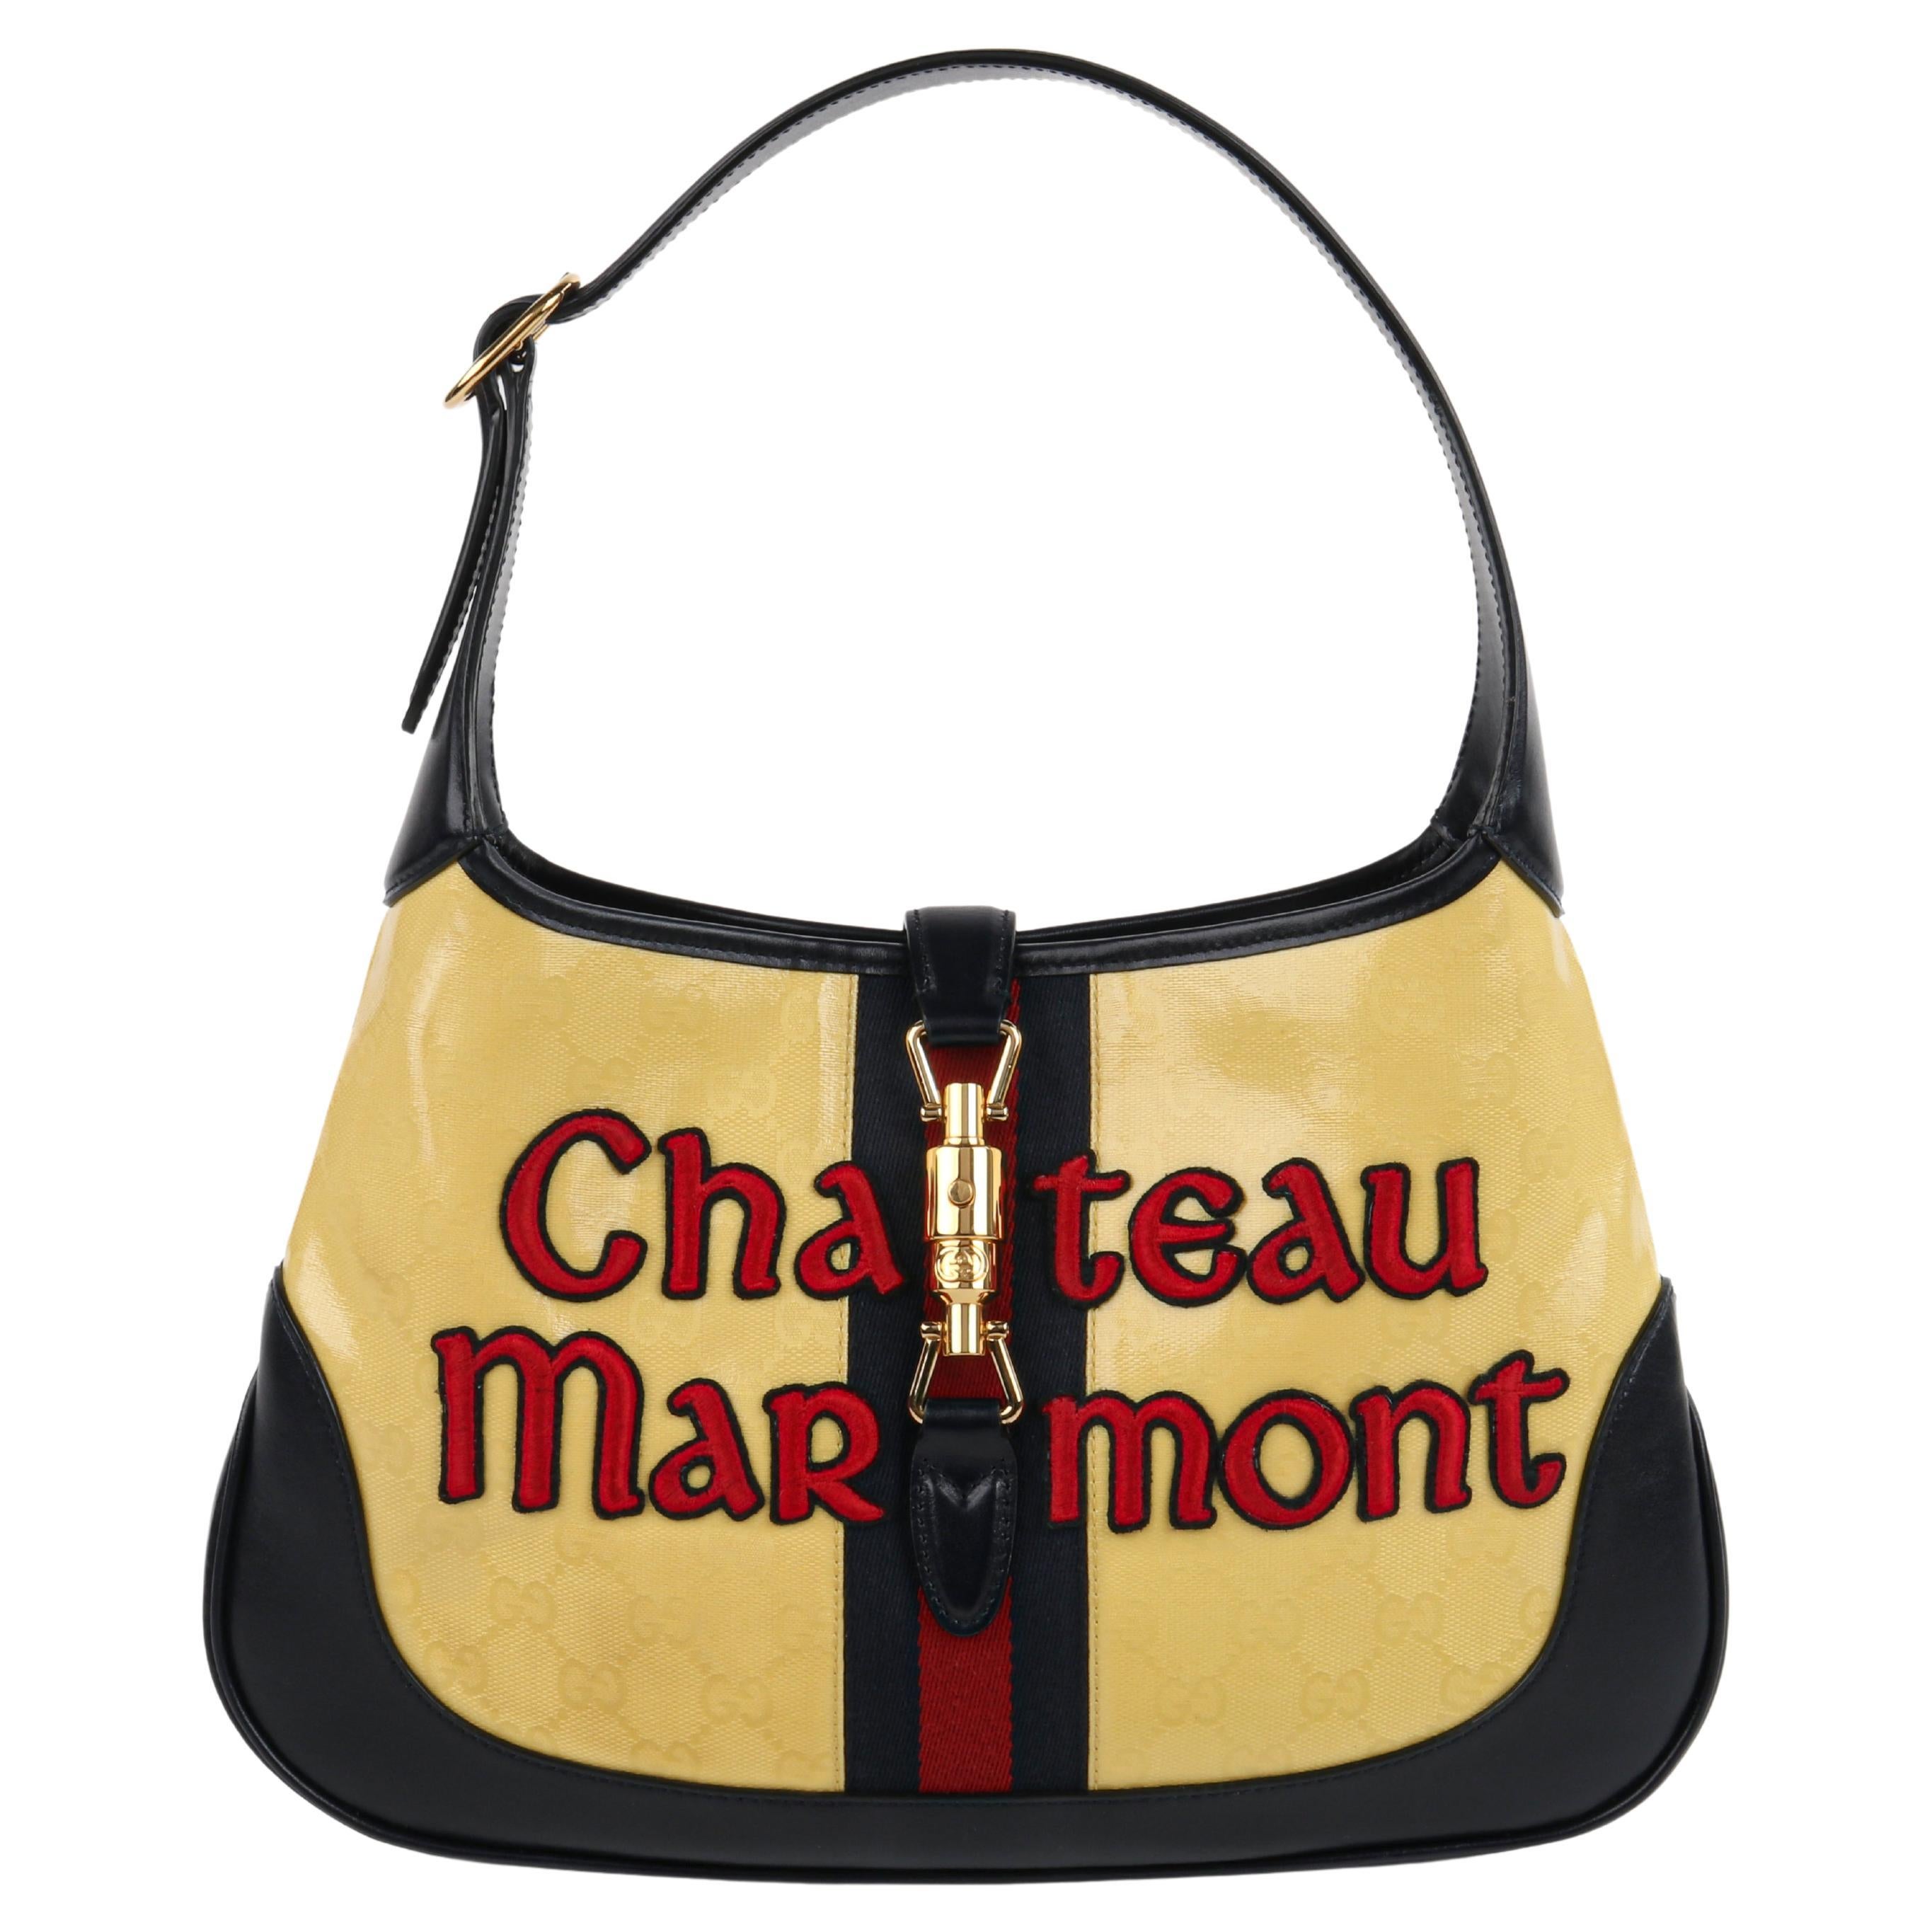 GUCCI Cruise 2019 "Chateau Marmont" Yellow GG Leather Hollywood Hobo Bag Purse